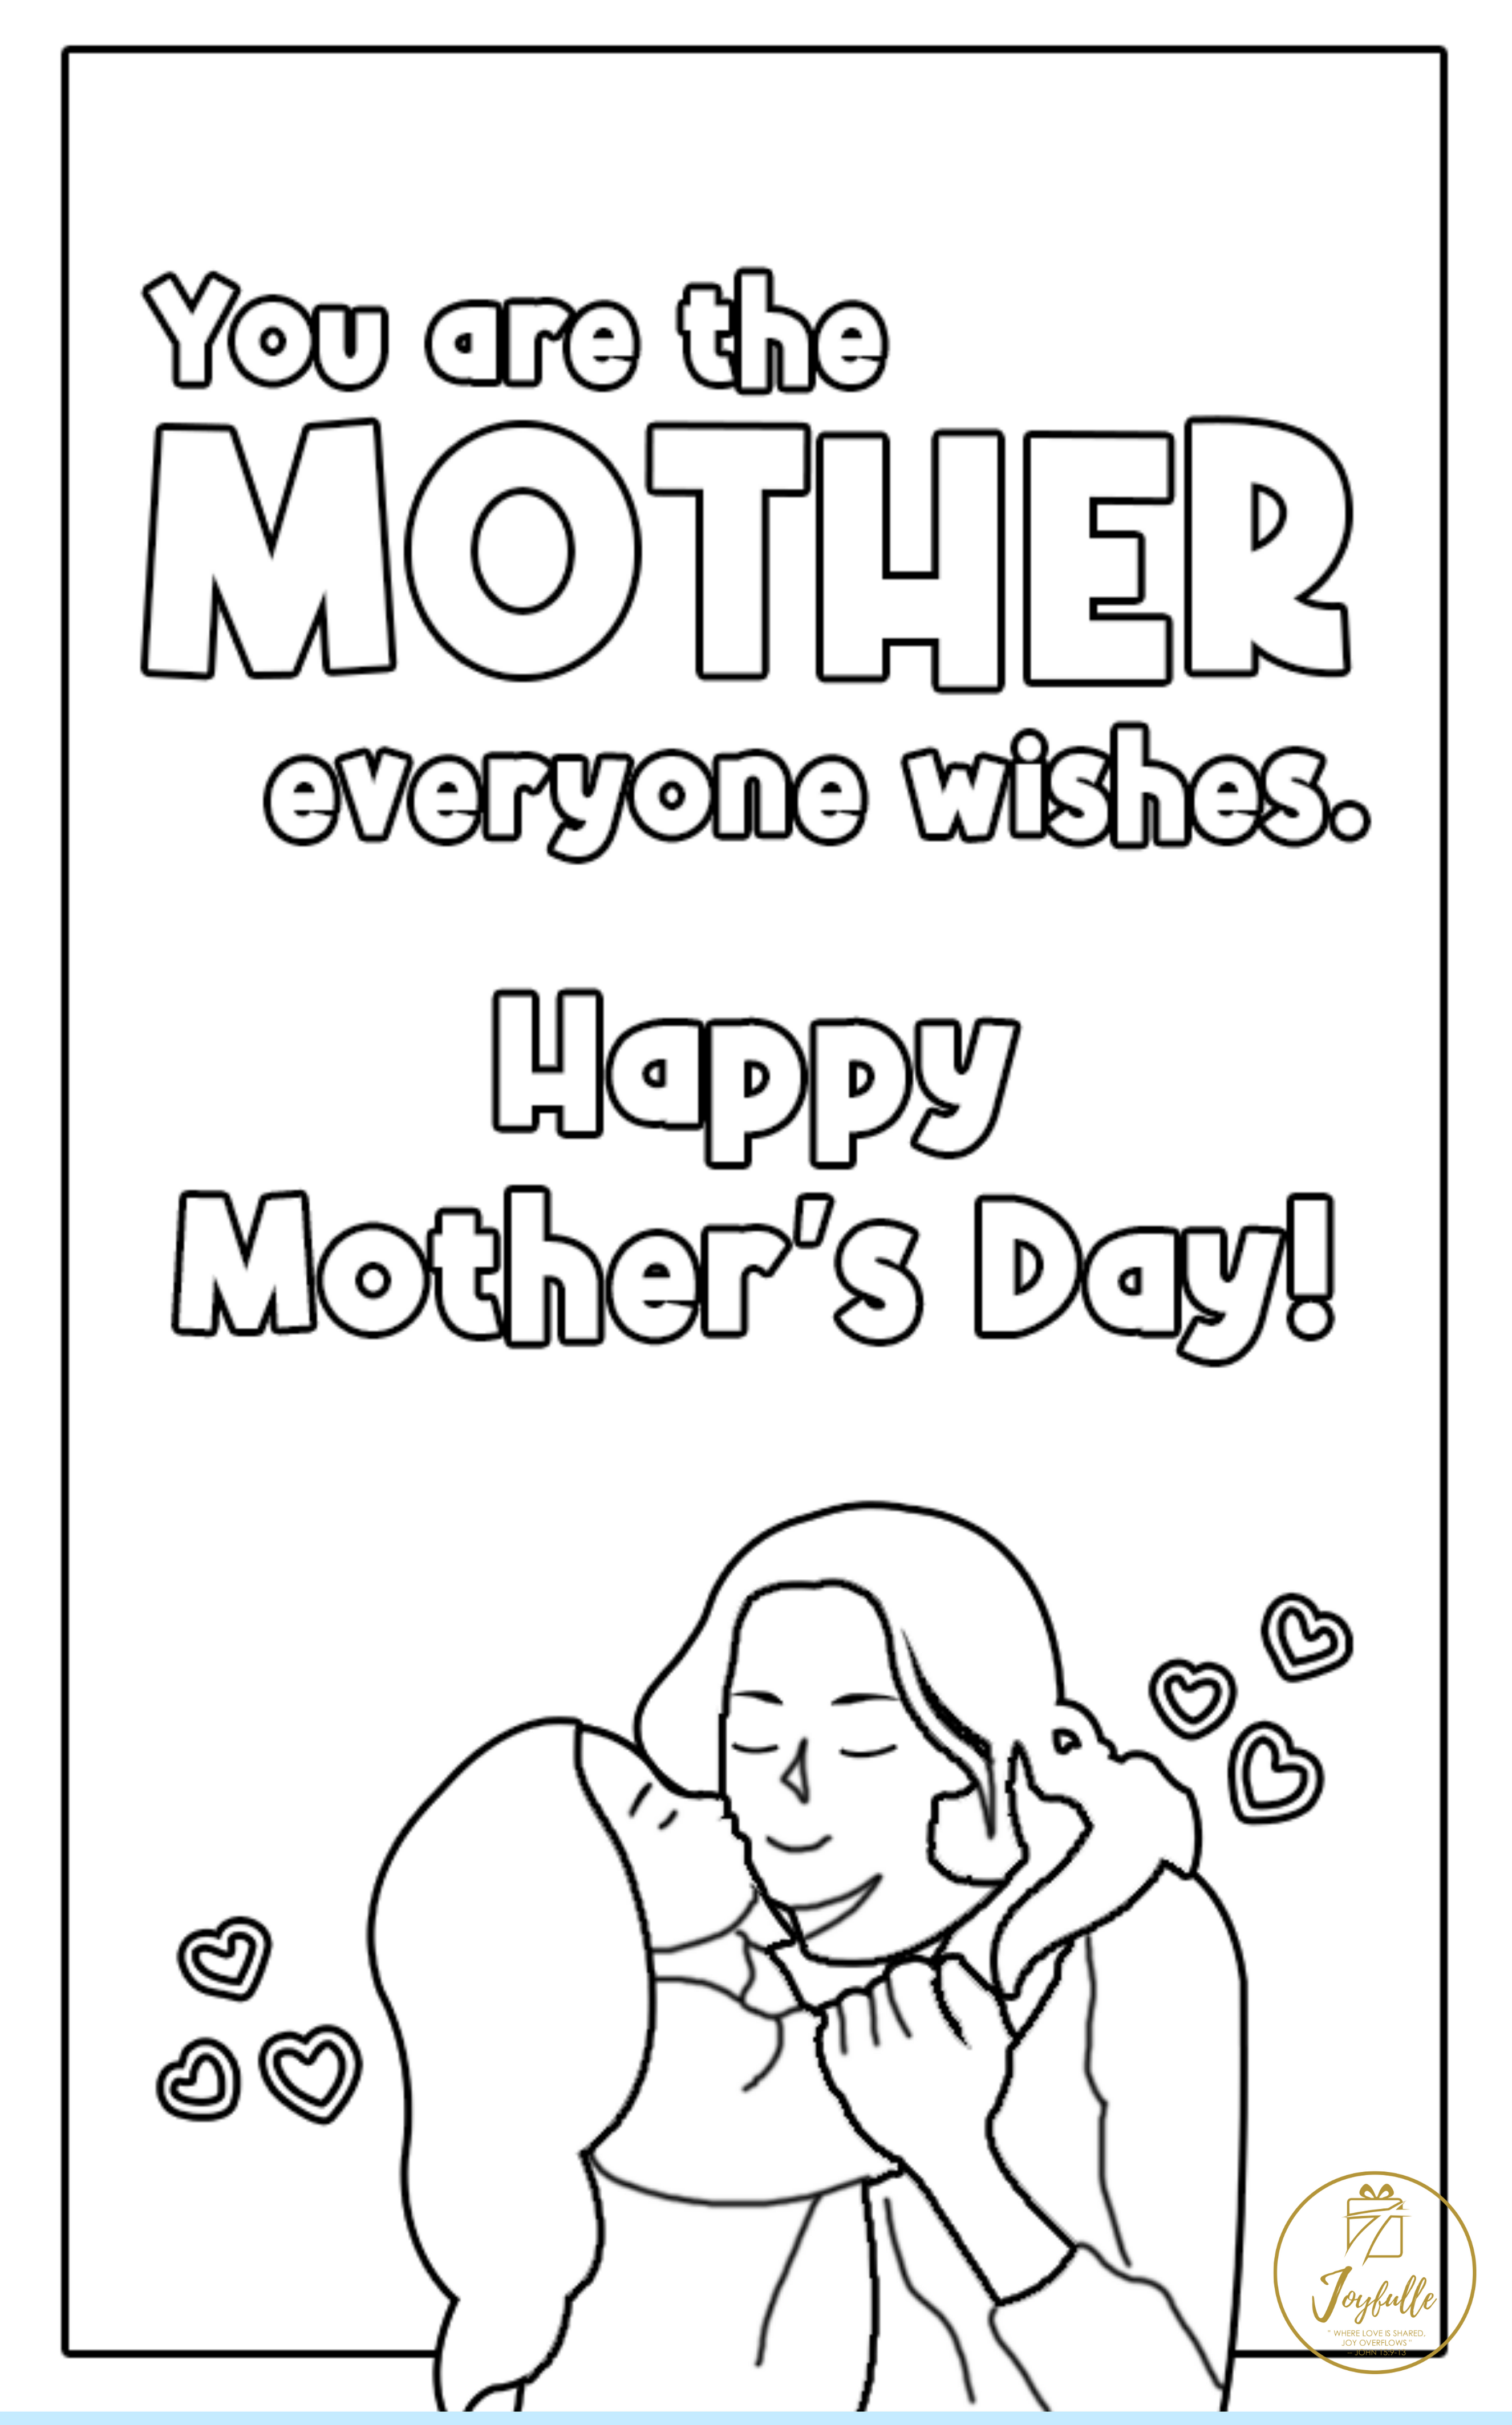 Mother's Day Greeting Card 20